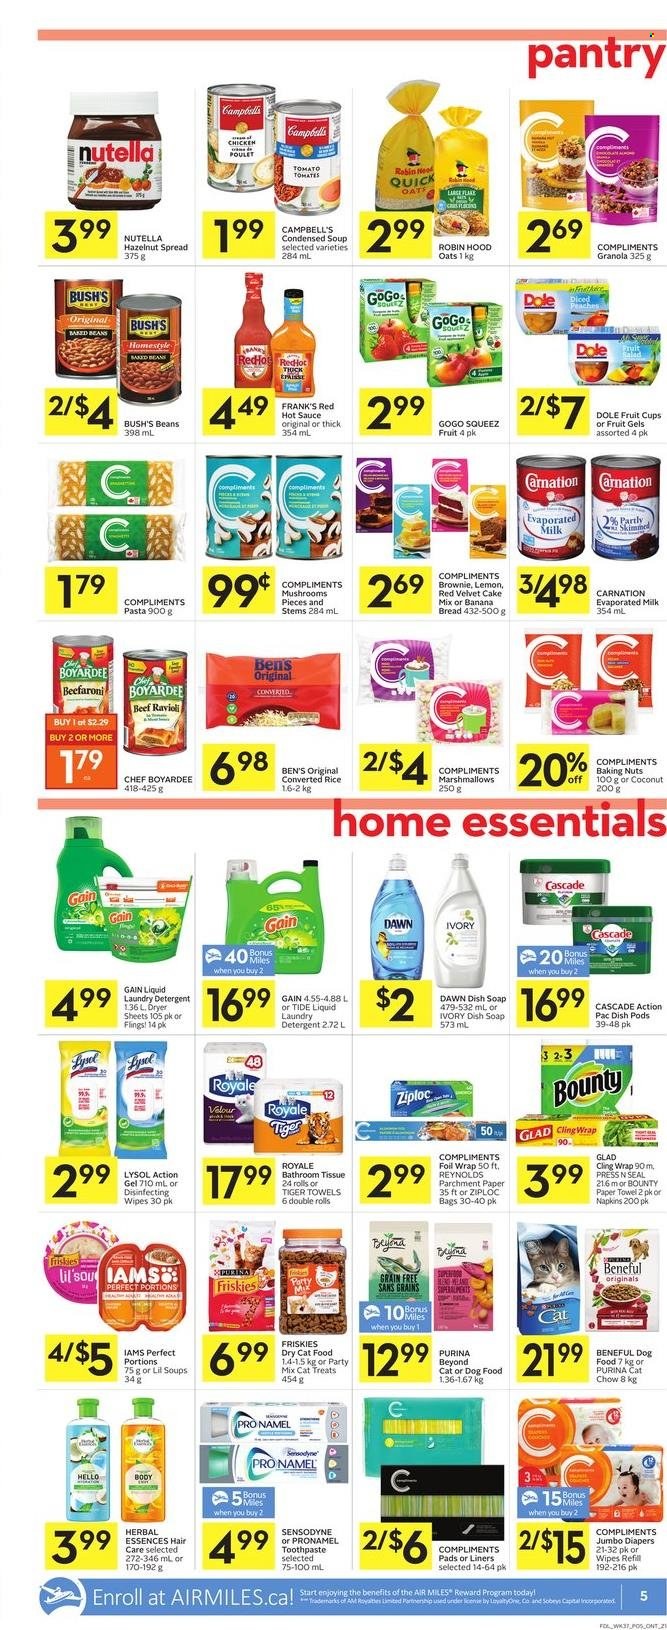 thumbnail - Foodland Flyer - January 06, 2022 - January 12, 2022 - Sales products - mushrooms, bread, brownies, banana bread, cake mix, beans, Dole, fruit cup, Campbell's, condensed soup, soup, pasta, sauce, instant soup, evaporated milk, Bounty, oats, Chef Boyardee, rice, hot sauce, hazelnut spread, detergent, granola, Nutella, Sensodyne. Page 7.